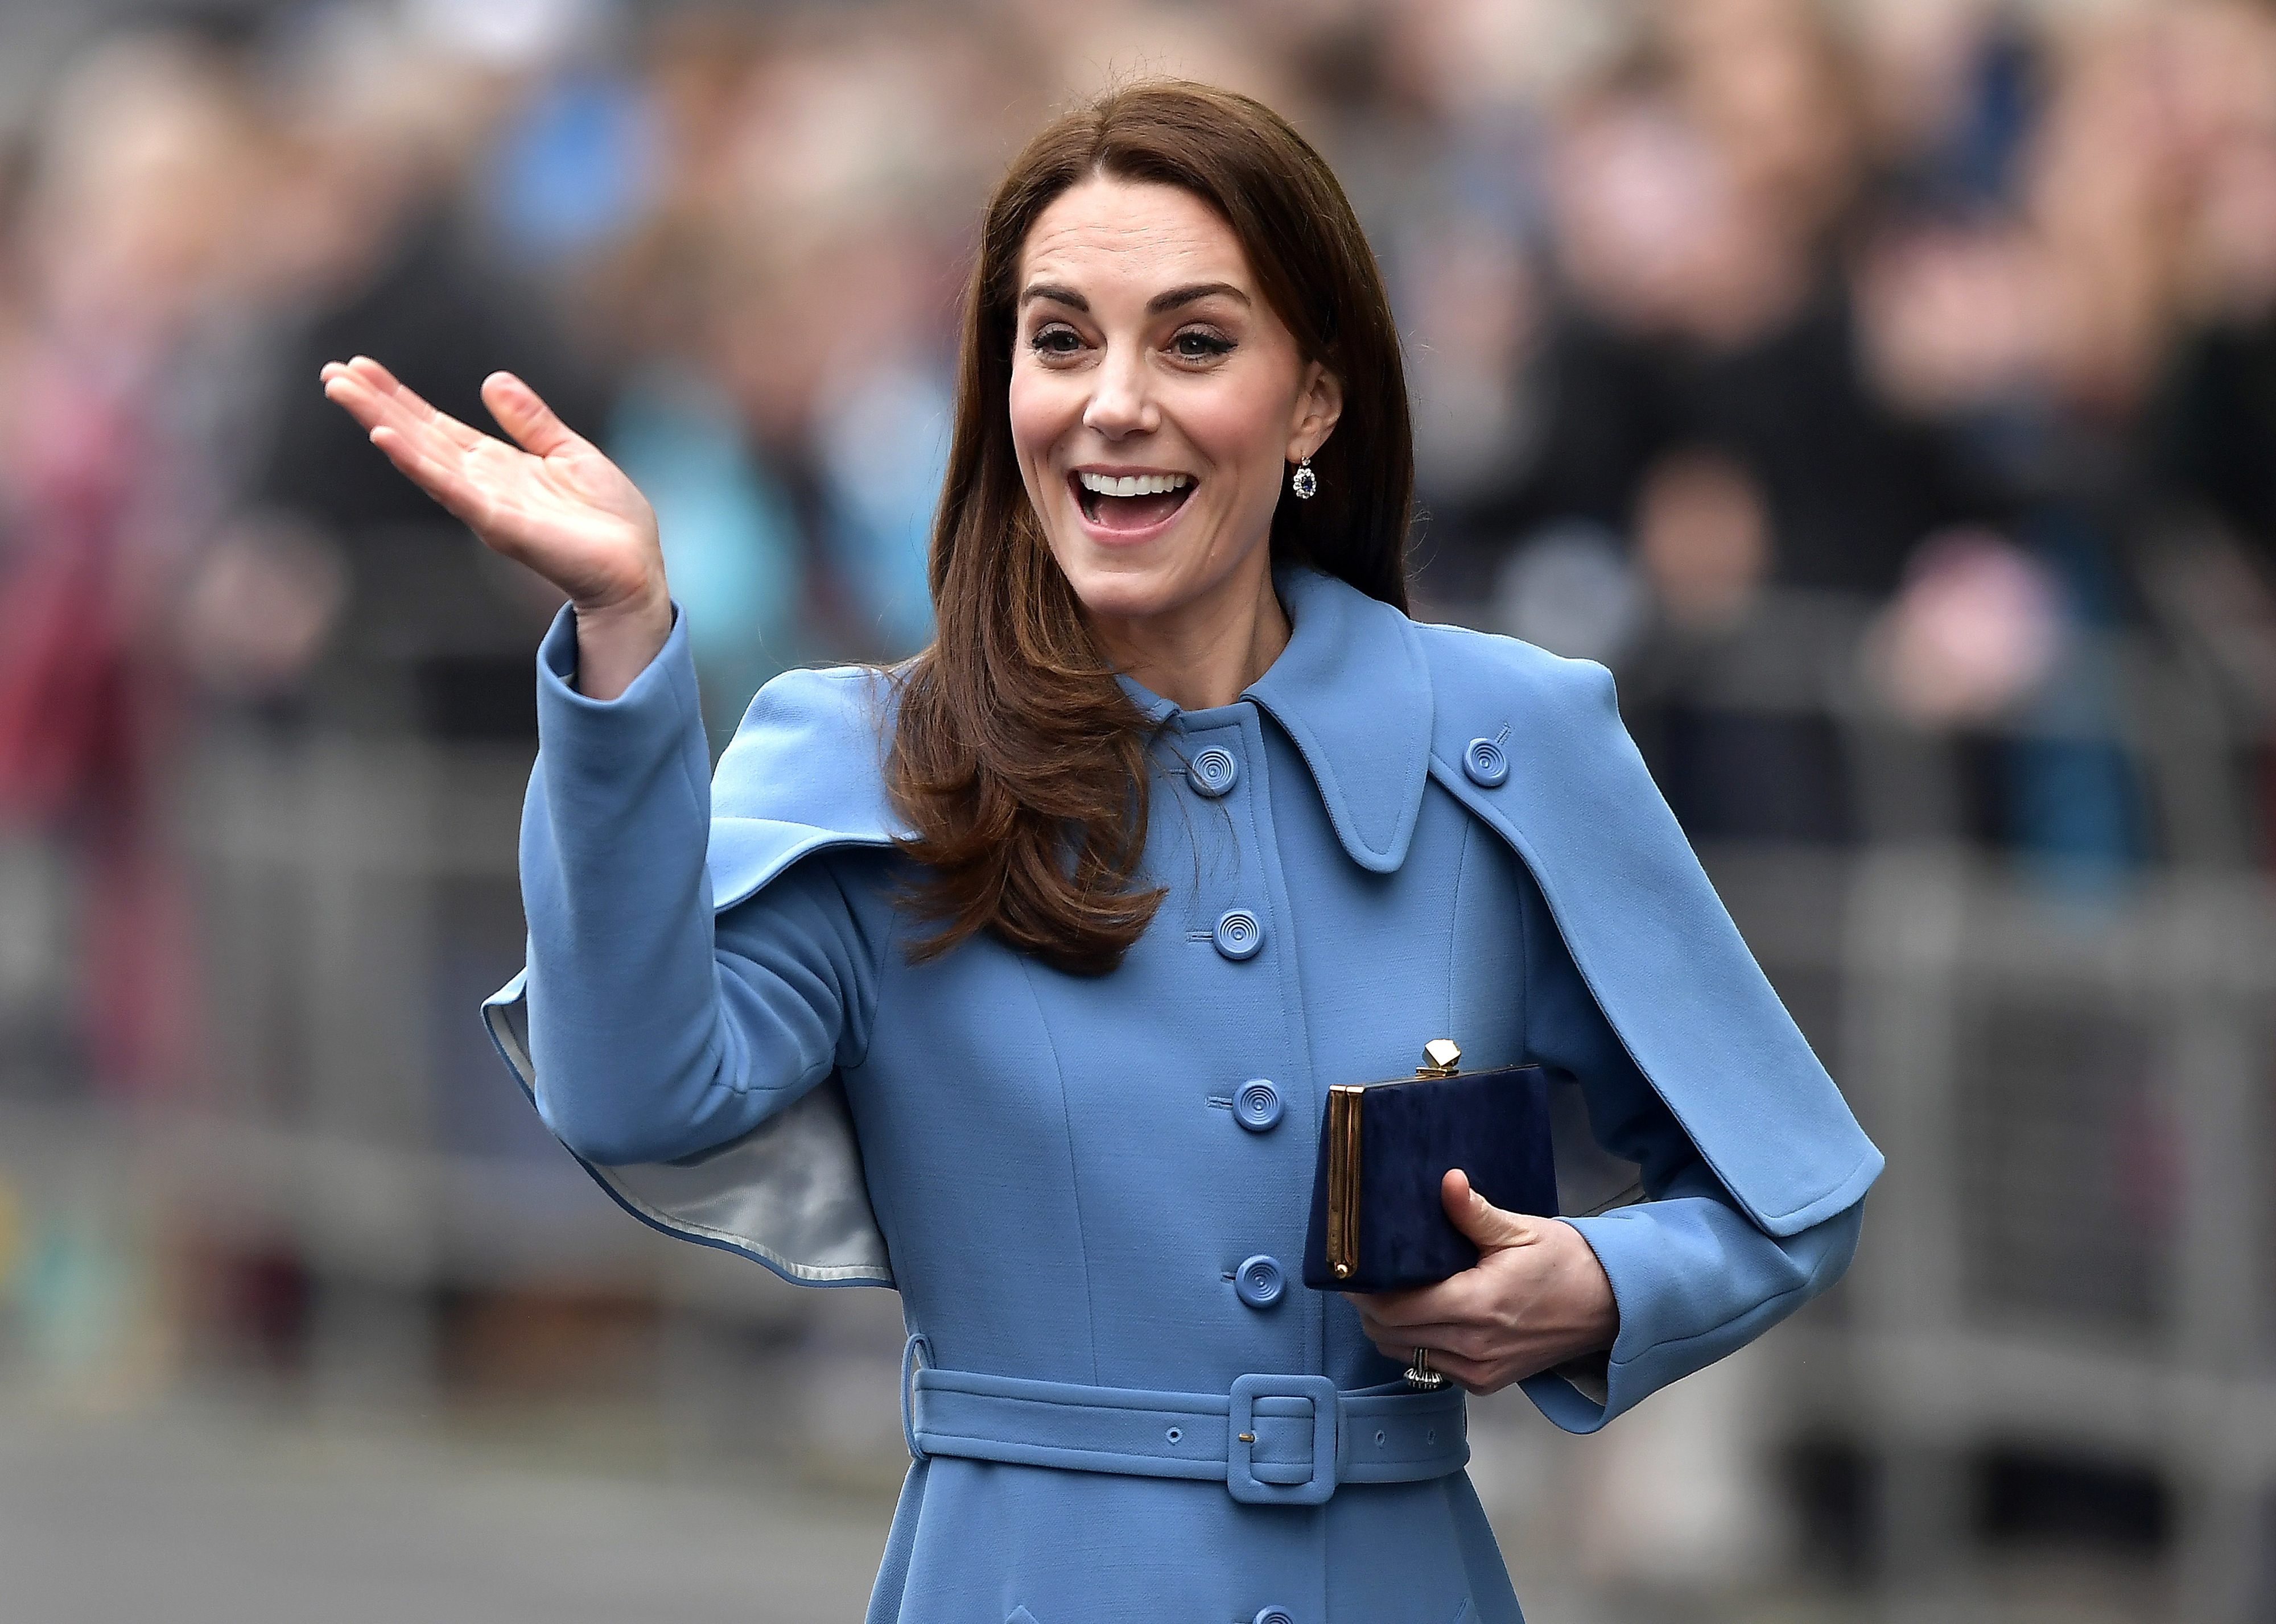 Kate Middleton in blue coat waves with her right hand, smiling with onlookers in the background